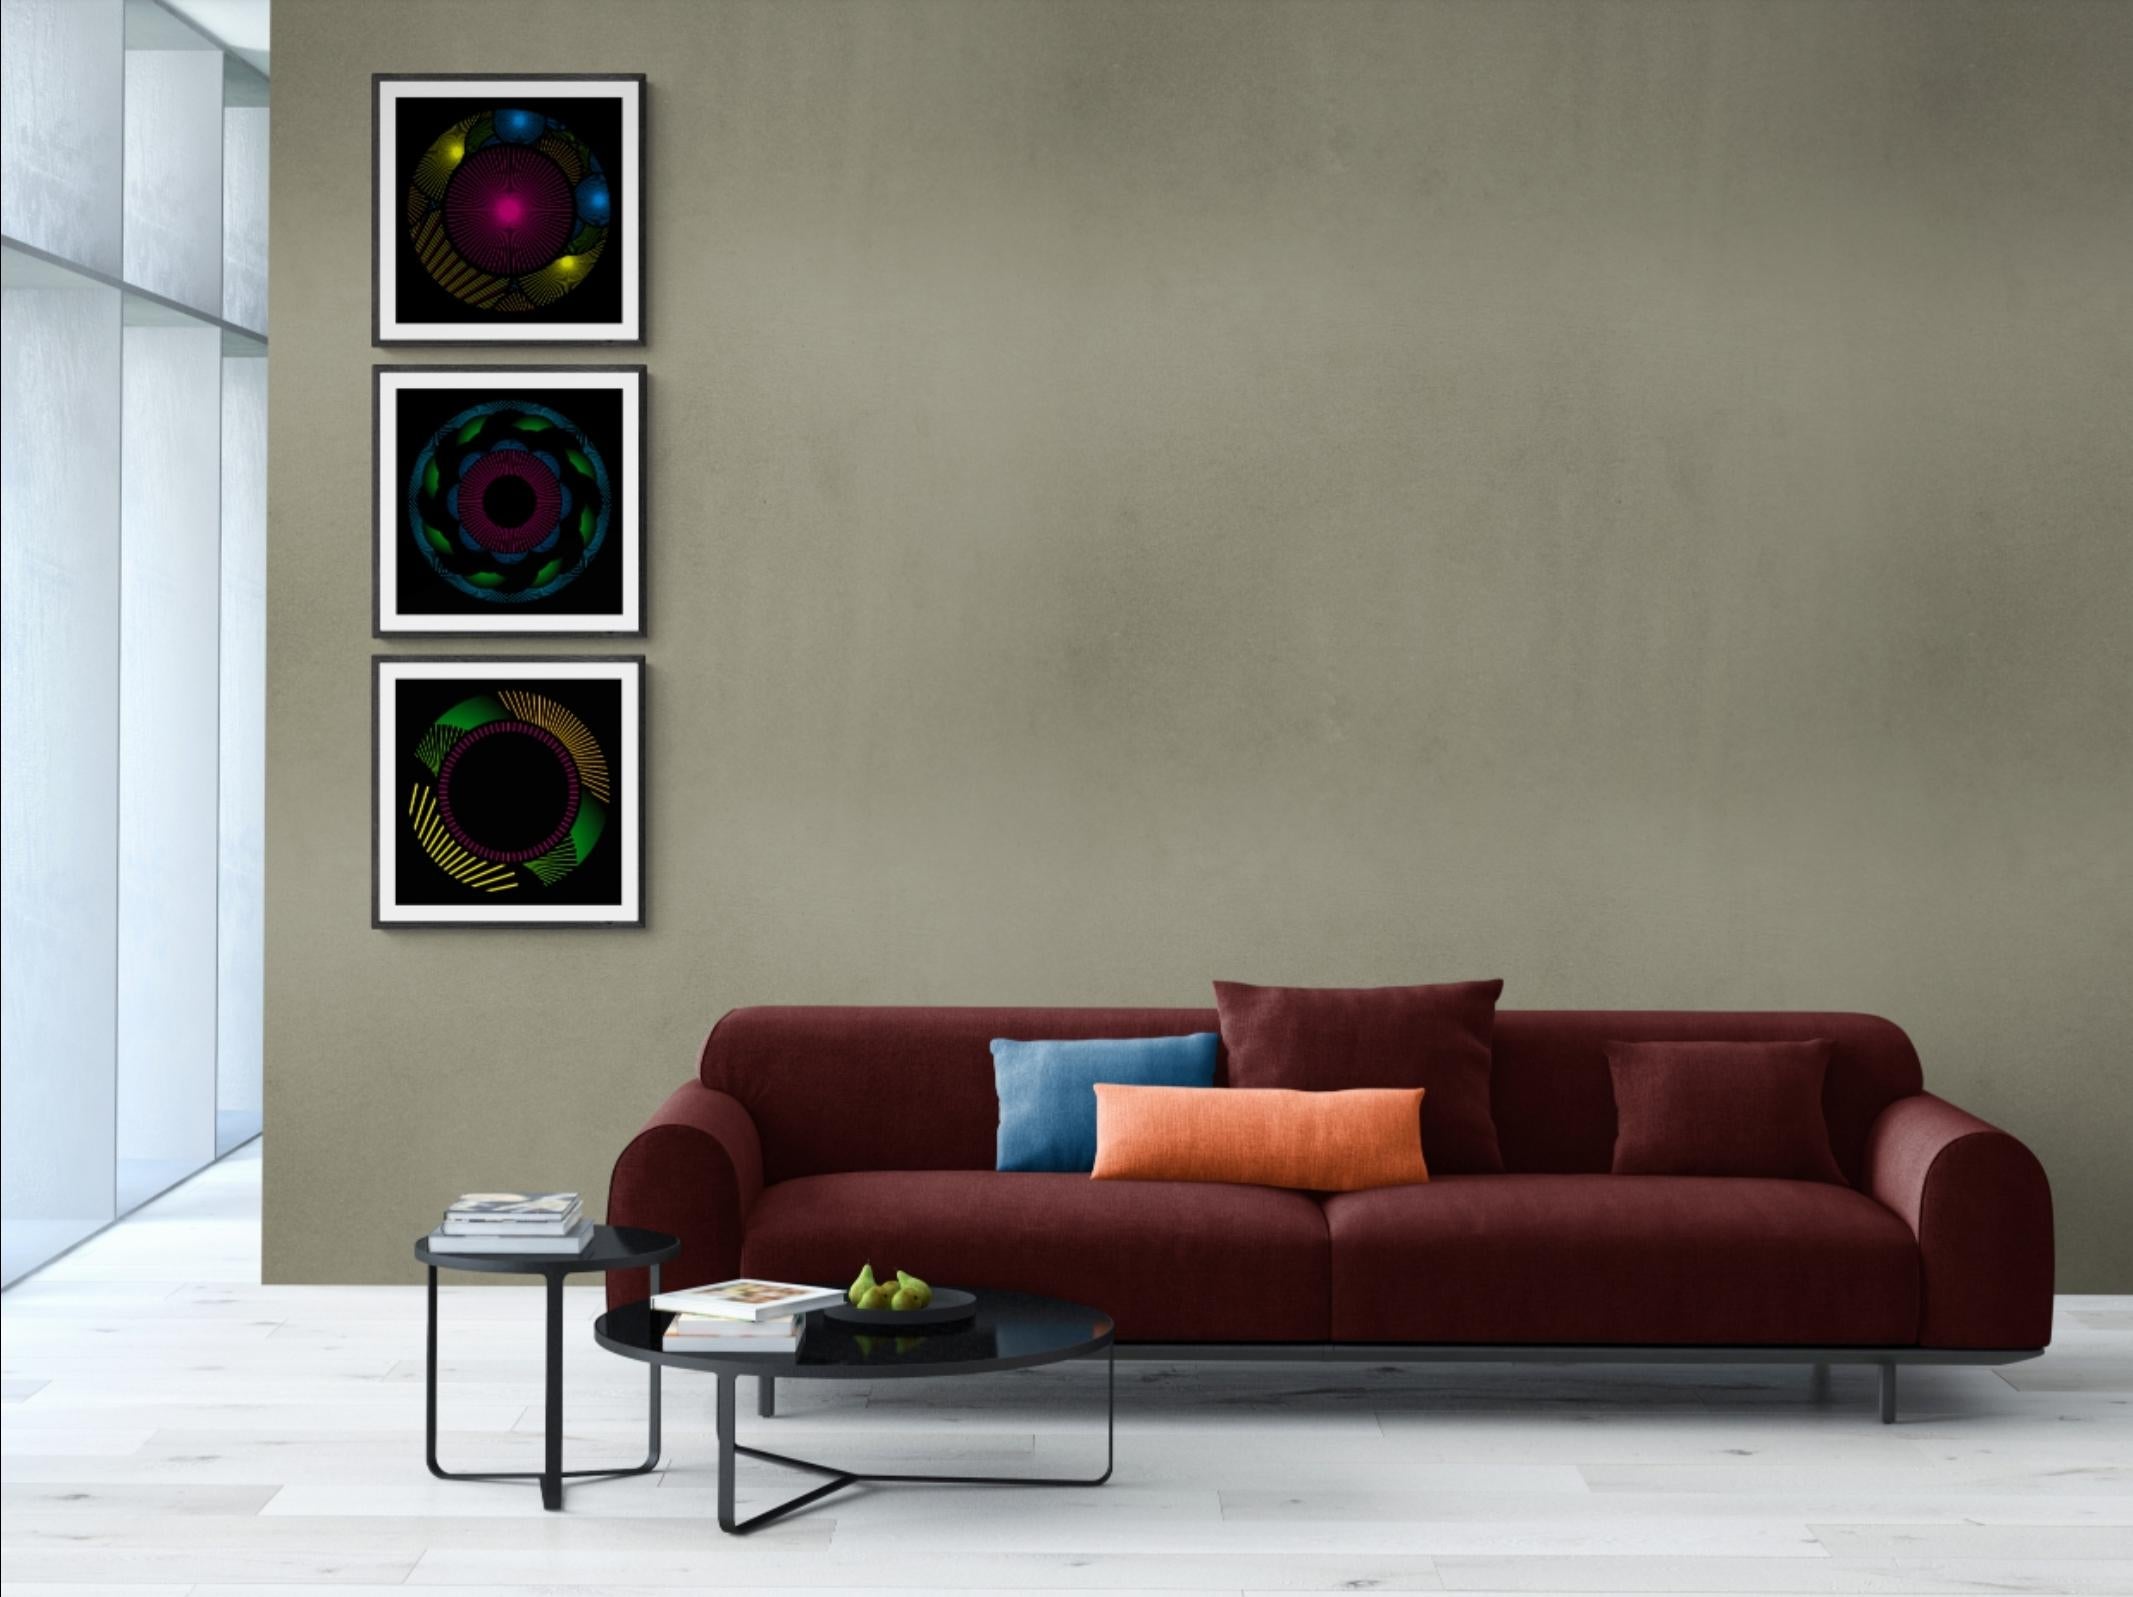 Nebulosa 24 - Black Abstract Print by Julio Campos